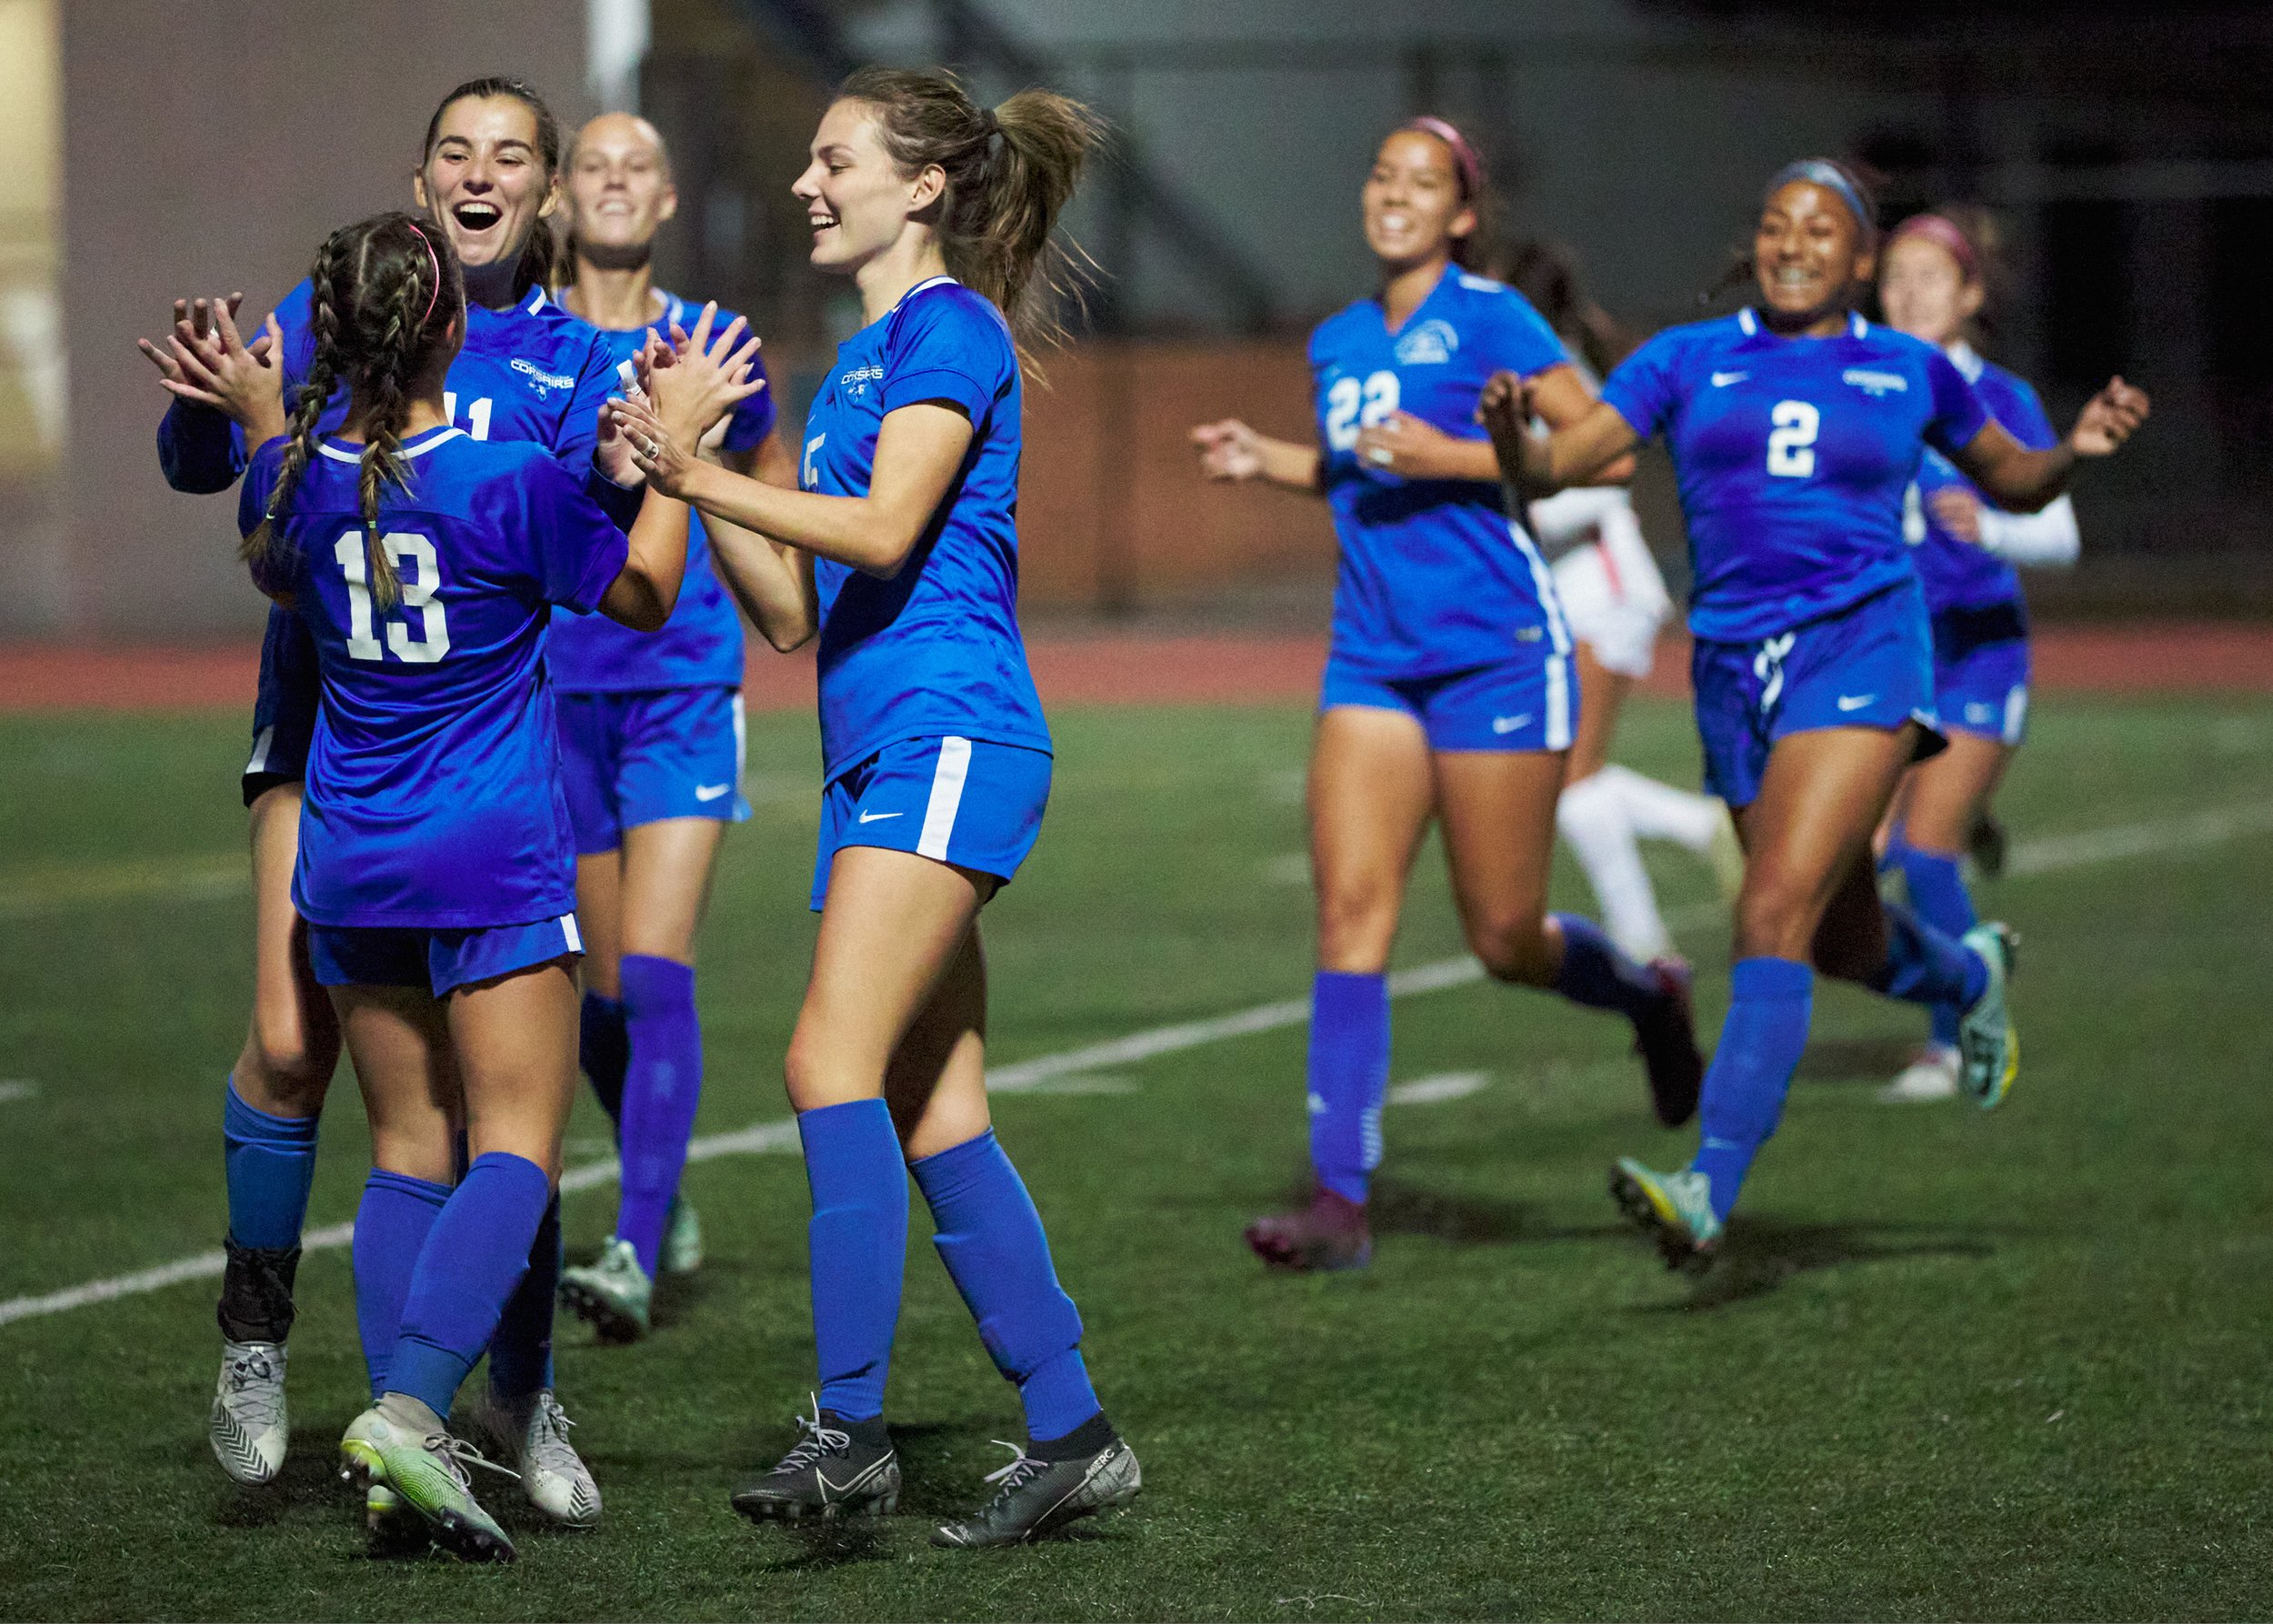  Members of the Santa Monica College Corsairs Women's Soccer team rush to celebrate the goal scored by Sophie Doumitt (13) during the soccer match against the Bakersfield College Renegades on Wednesday, Nov. 16, 2022, at Corsair Field in Santa Monica